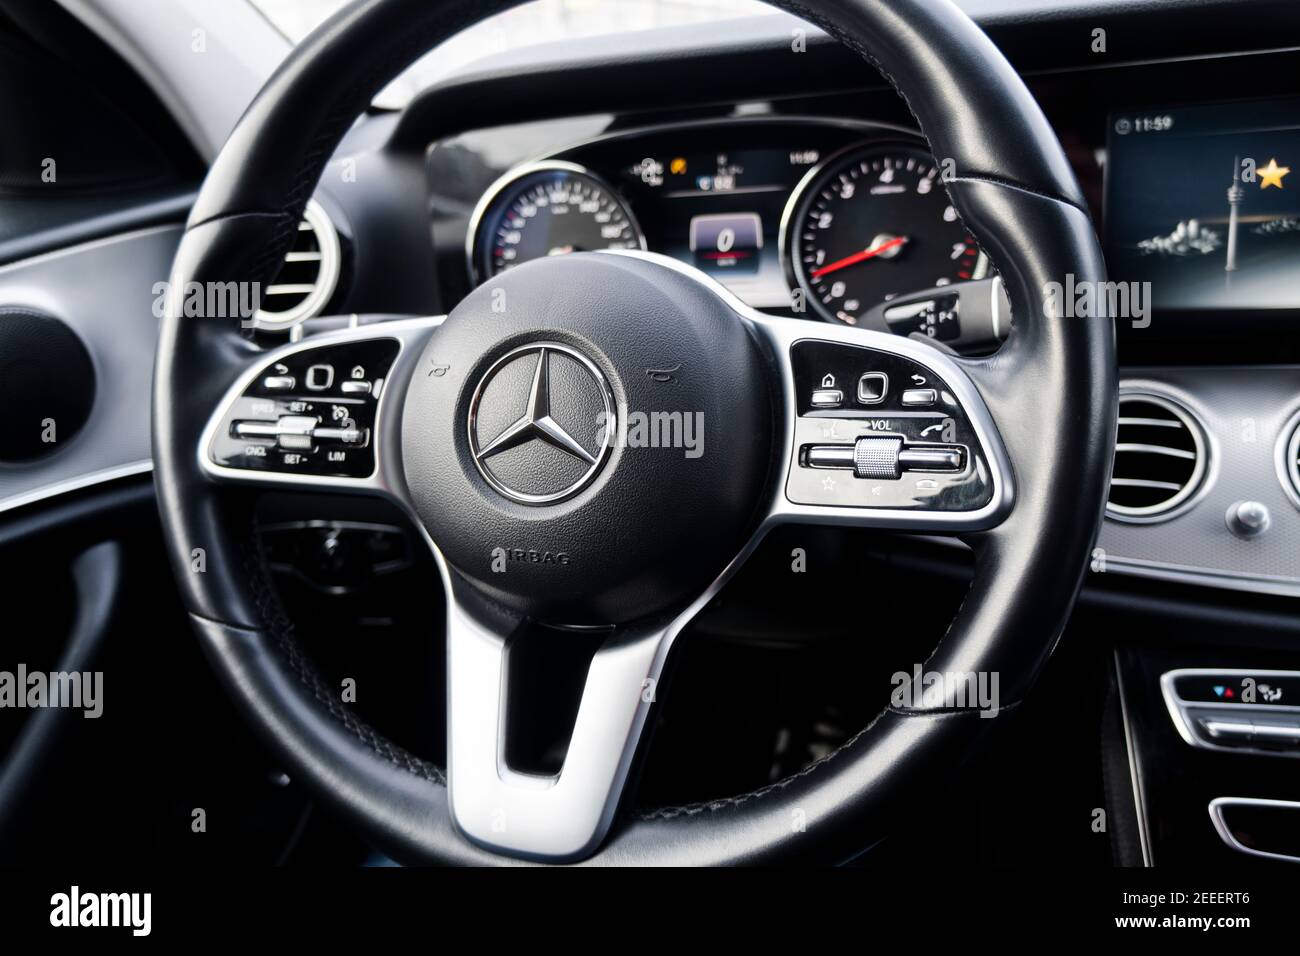 Sankt-Petersburg, Russia, February 10, 2021: Dashboard and steering wheel with media control buttons of a Mercedes Benz E-class . Car interior detais Stock Photo